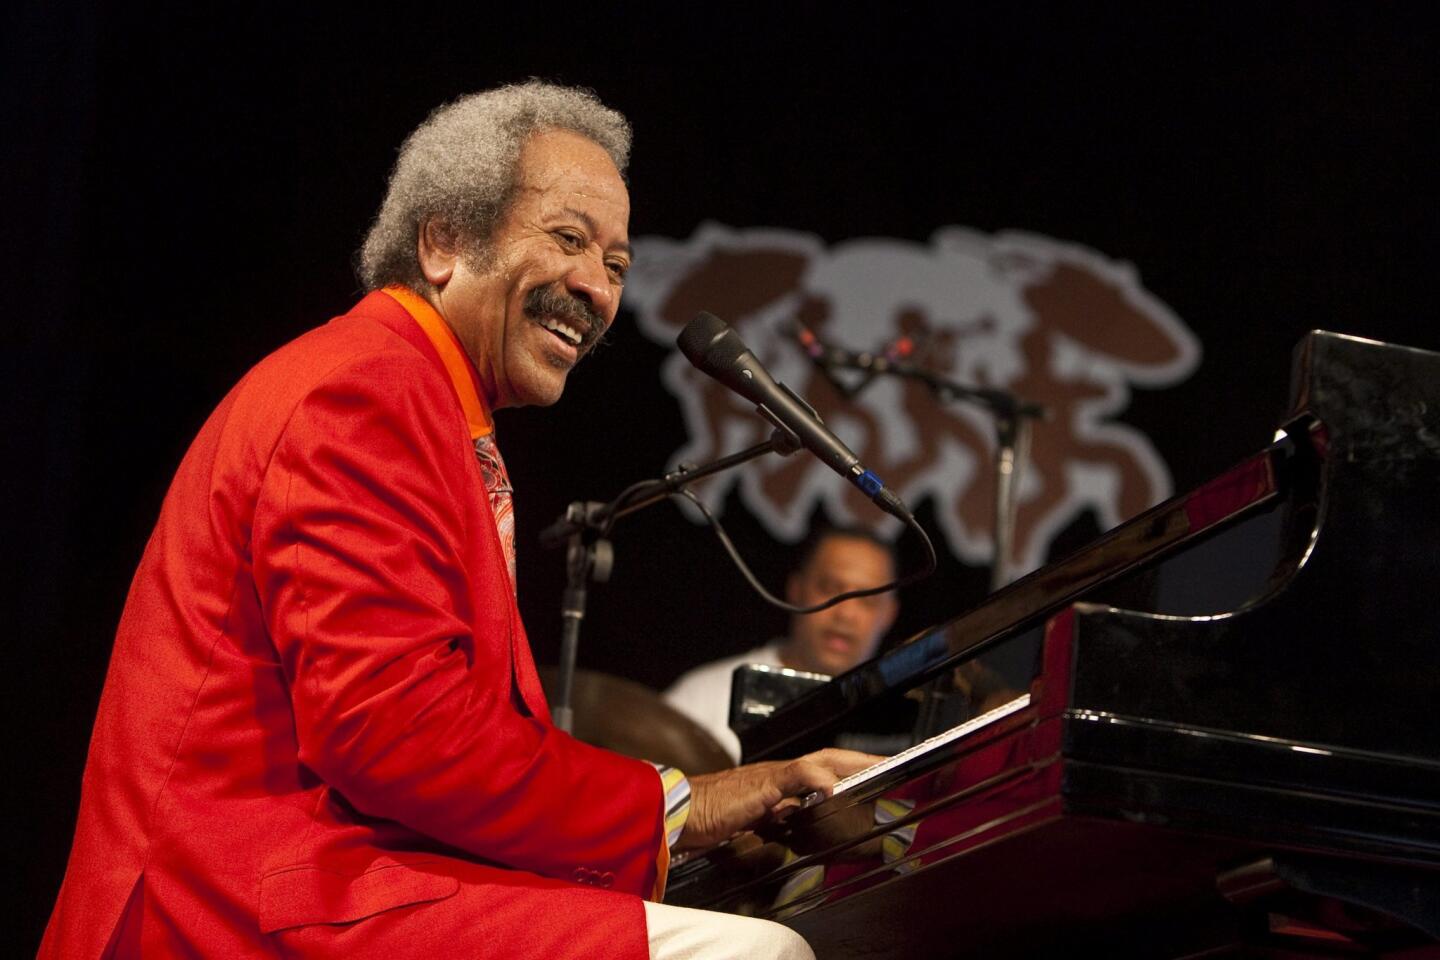 New Orleans musician, composer and record producer Allen Toussaint performing on the Jazz Tent stage at the New Orleans Jazz and Heritage Festival in 2010. Toussaint died in Spain after a performance.